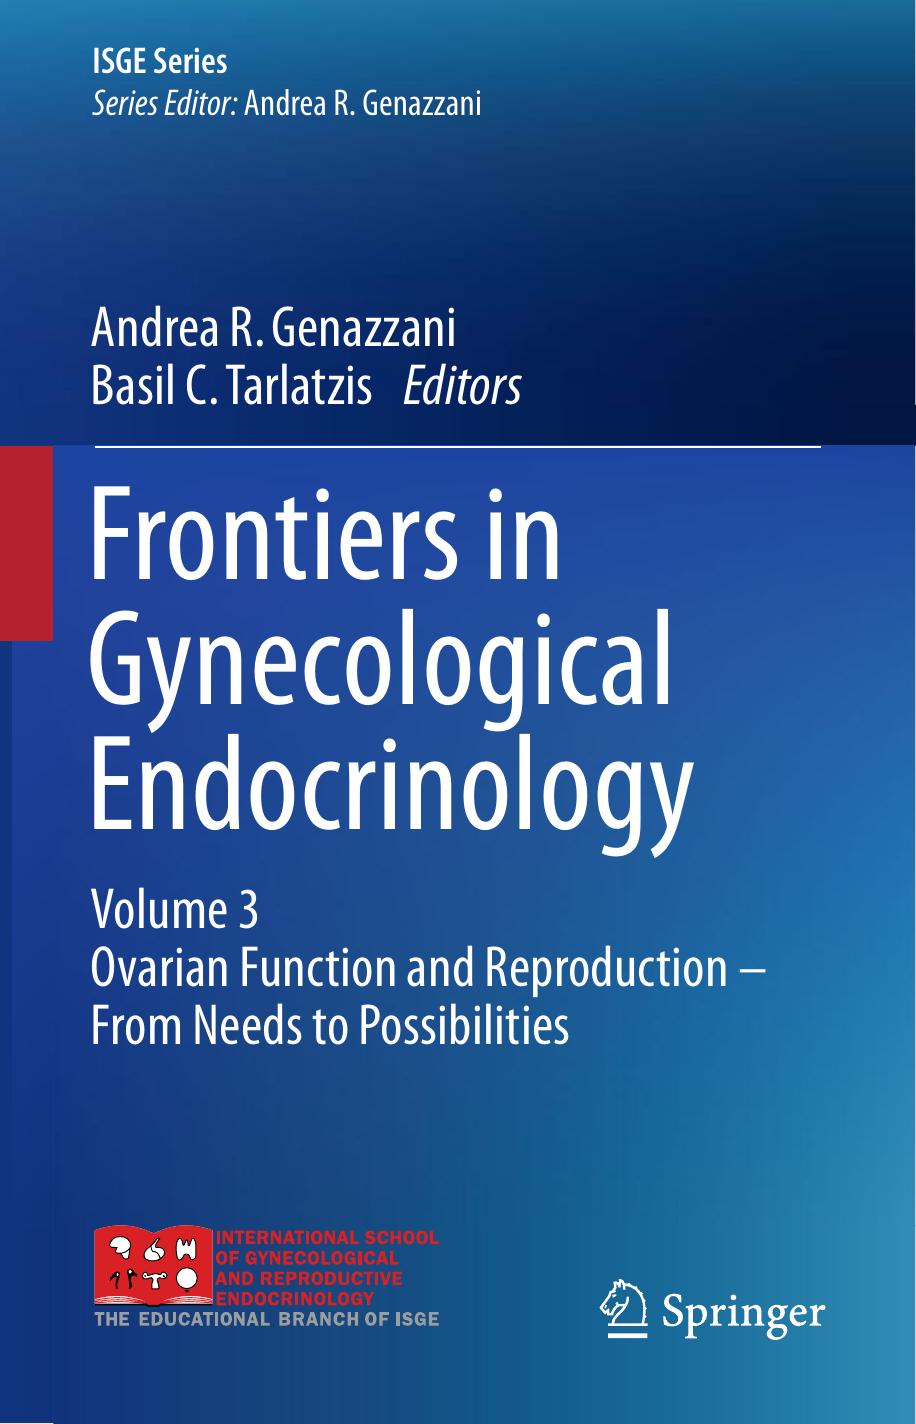 FRONTIERS IN GYNAECOLOGICAL ENDOCRINOLOGY 3